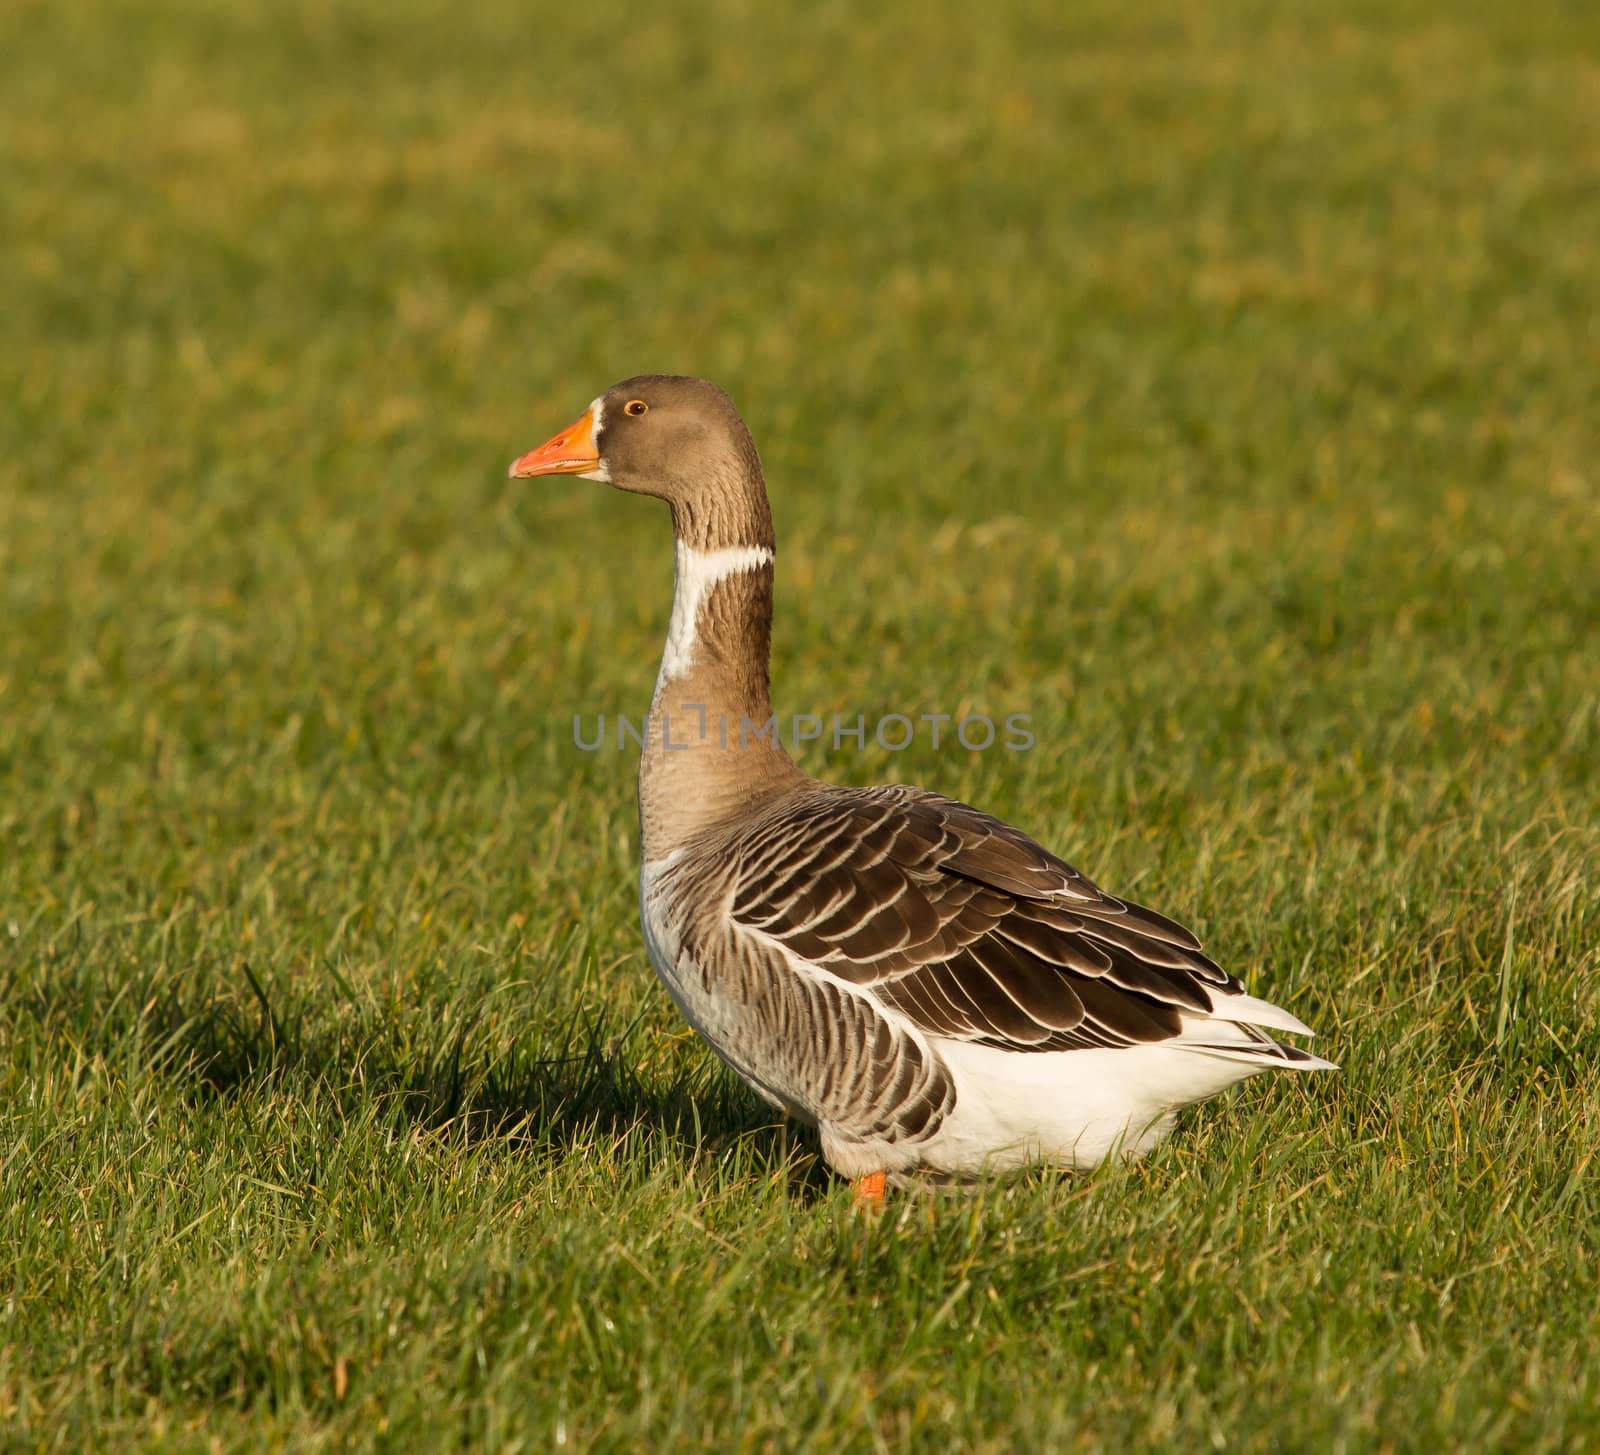 A goose by michaklootwijk